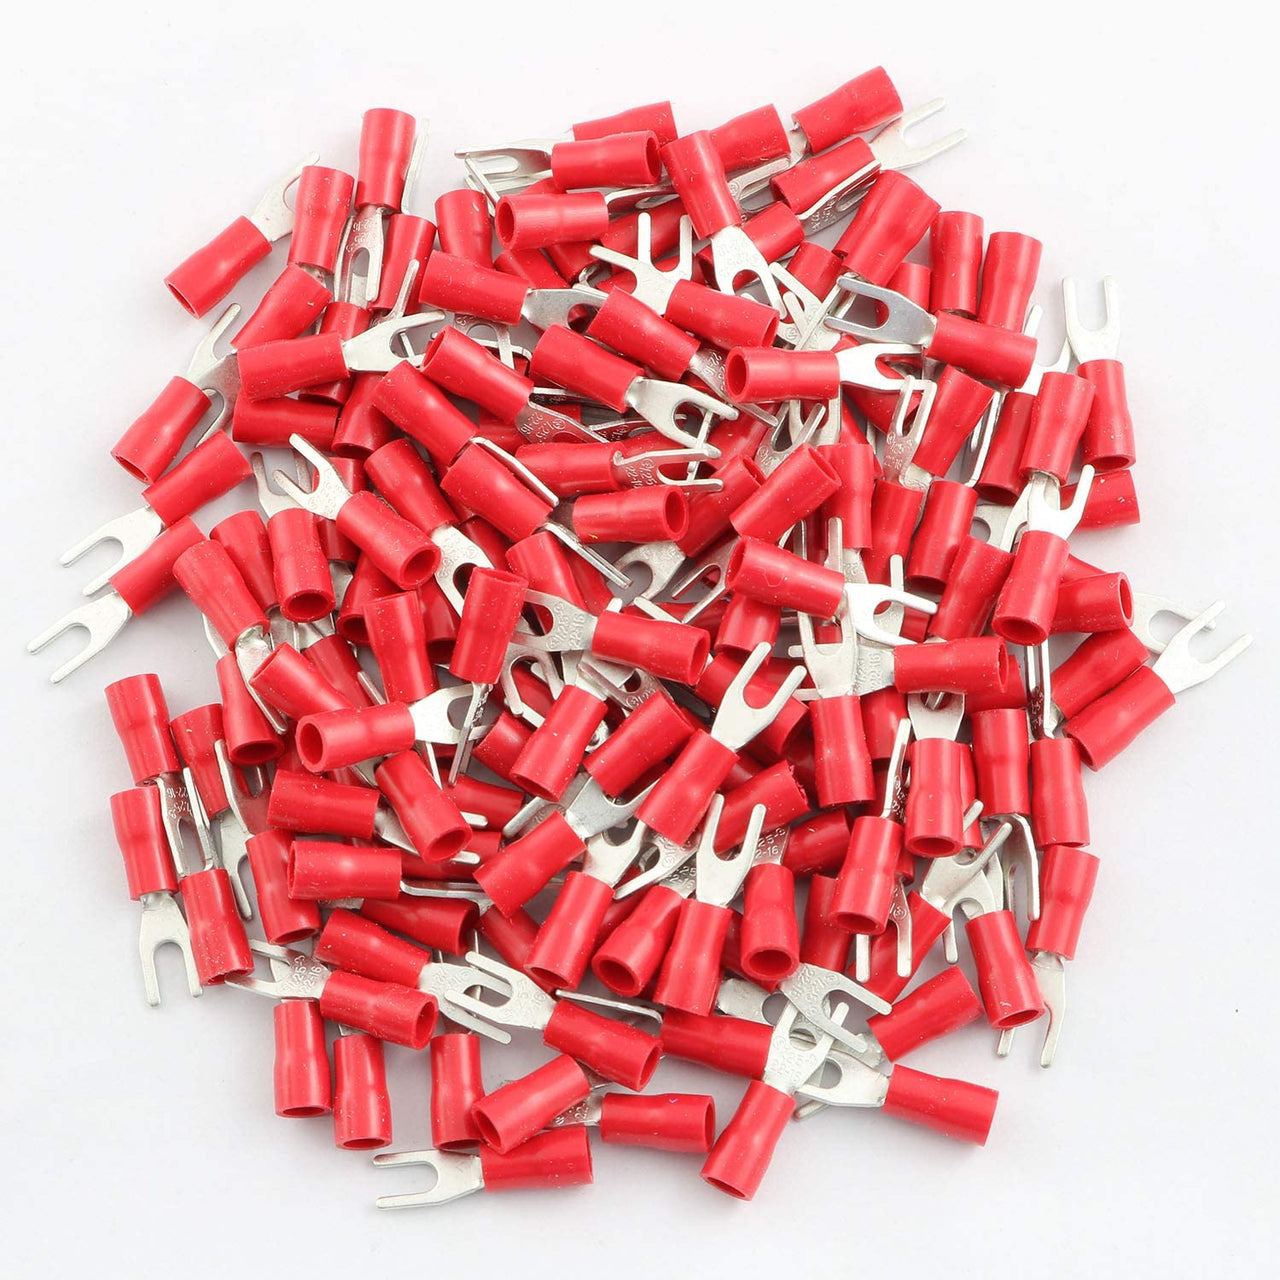 PATRON PSR8-100 100PCS #8 Red Insulated Fork Spade Wire Connector Electrical Crimp Terminal 18-22AWG